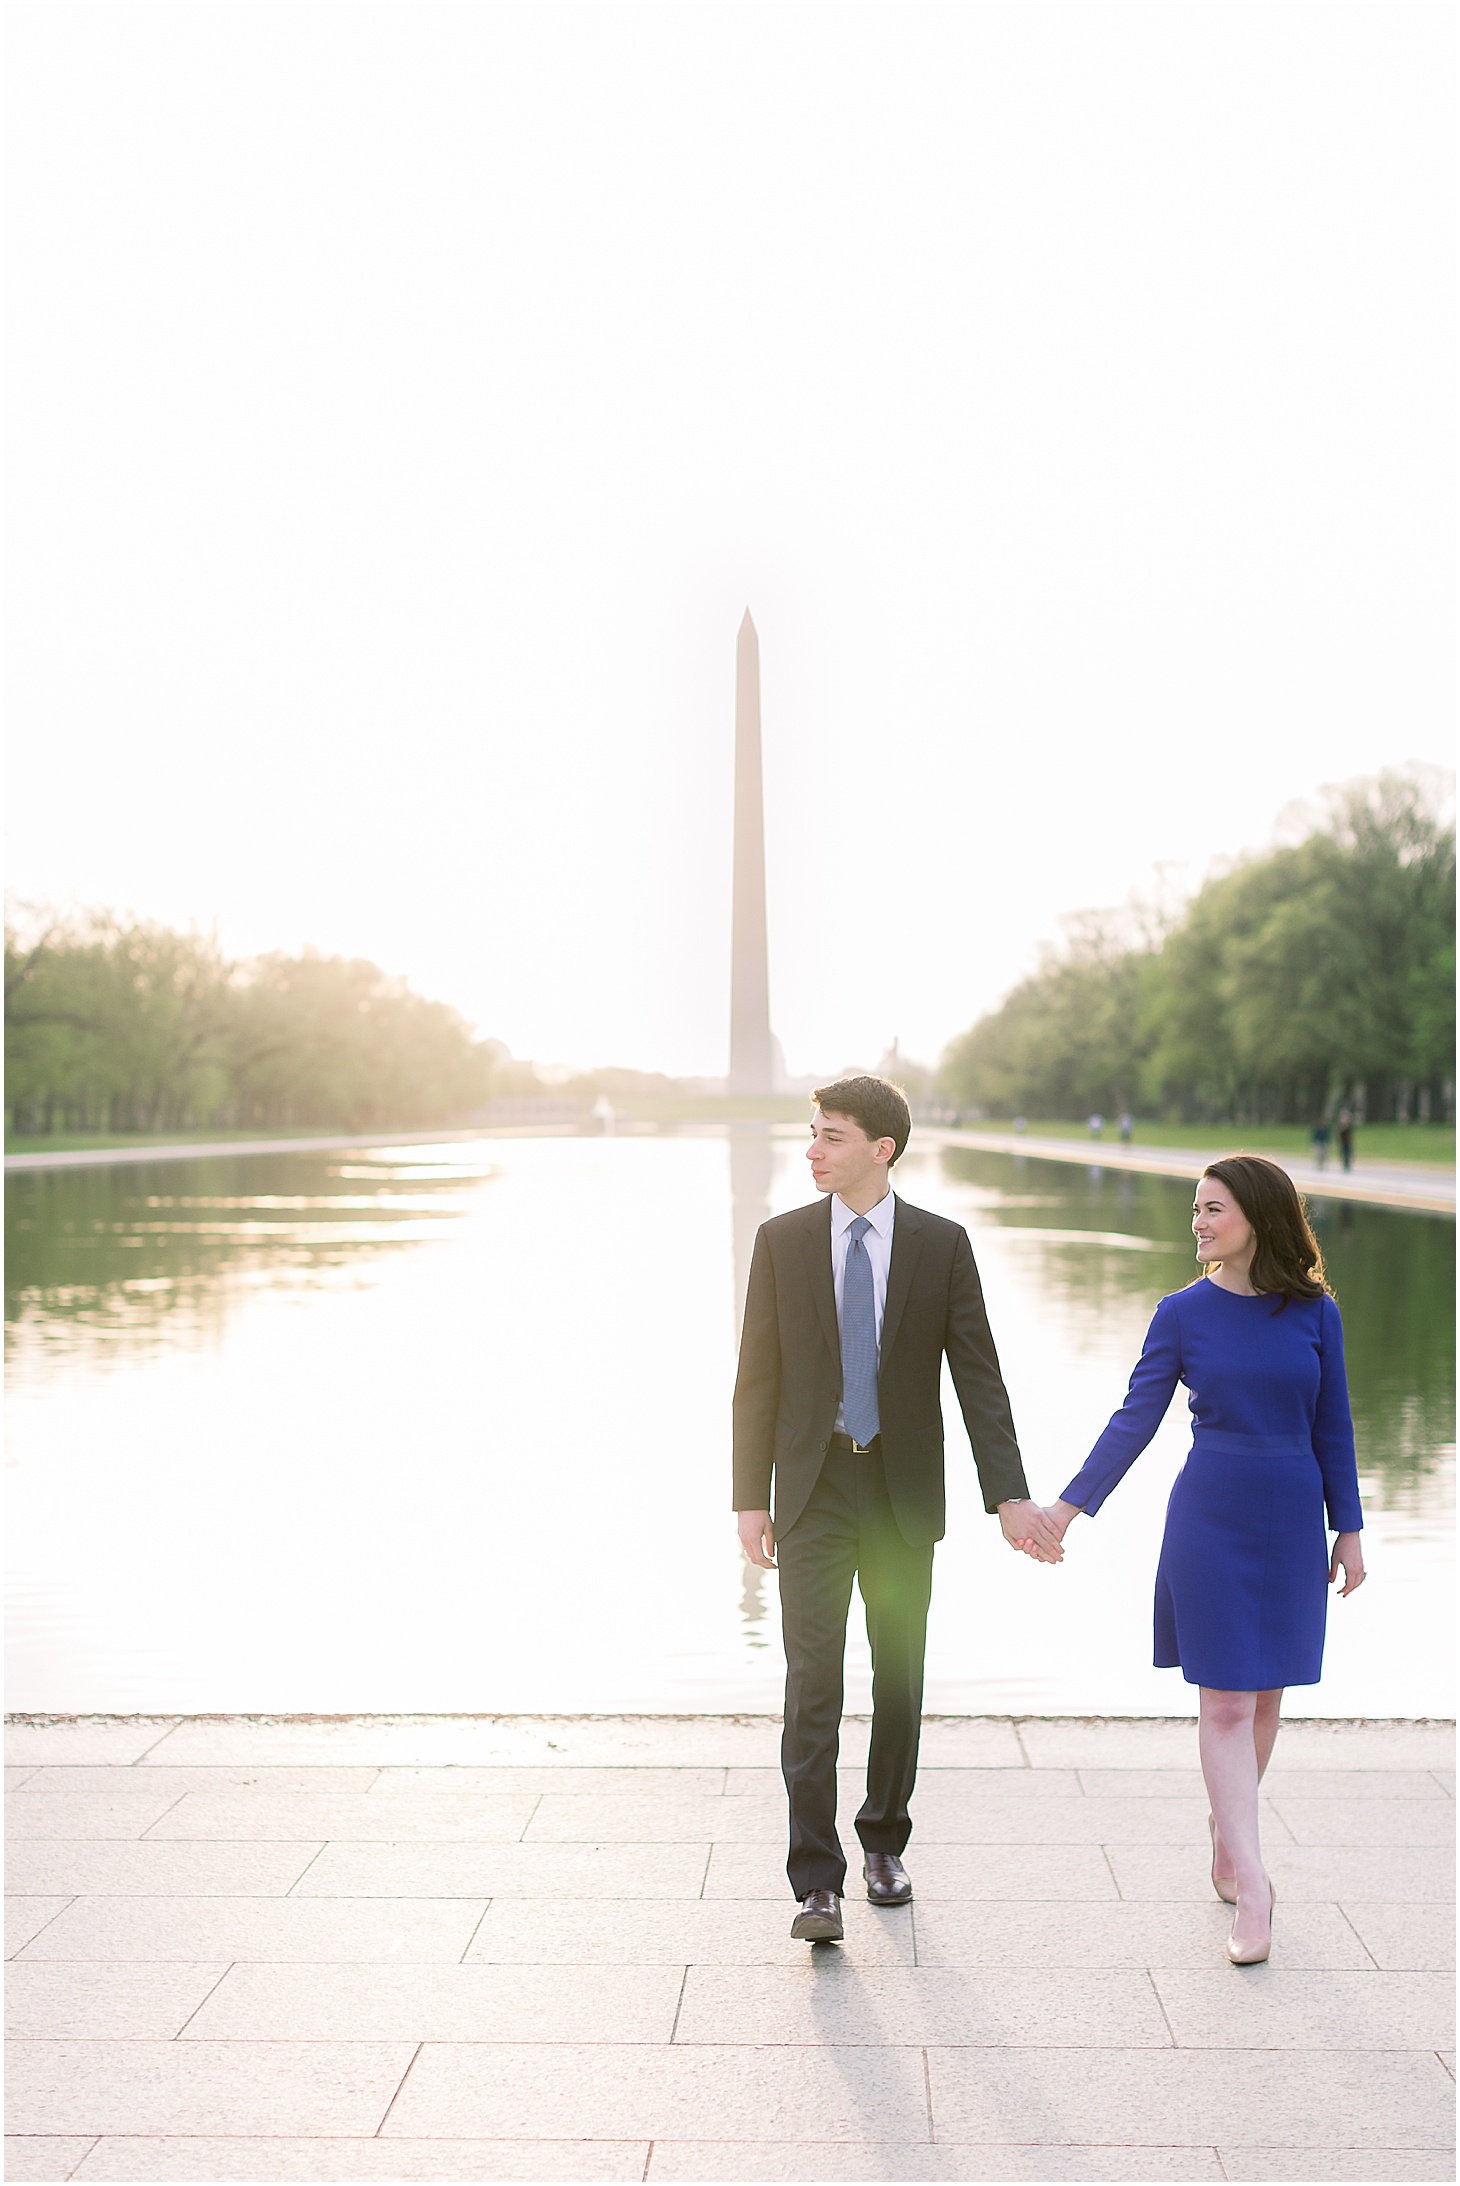 Engagement Portraits at Reflecting Pool in DC, Spring Blooms Engagement Session at the United States Supreme Court, Sarah Bradshaw Photography, DC Engagement Photographer